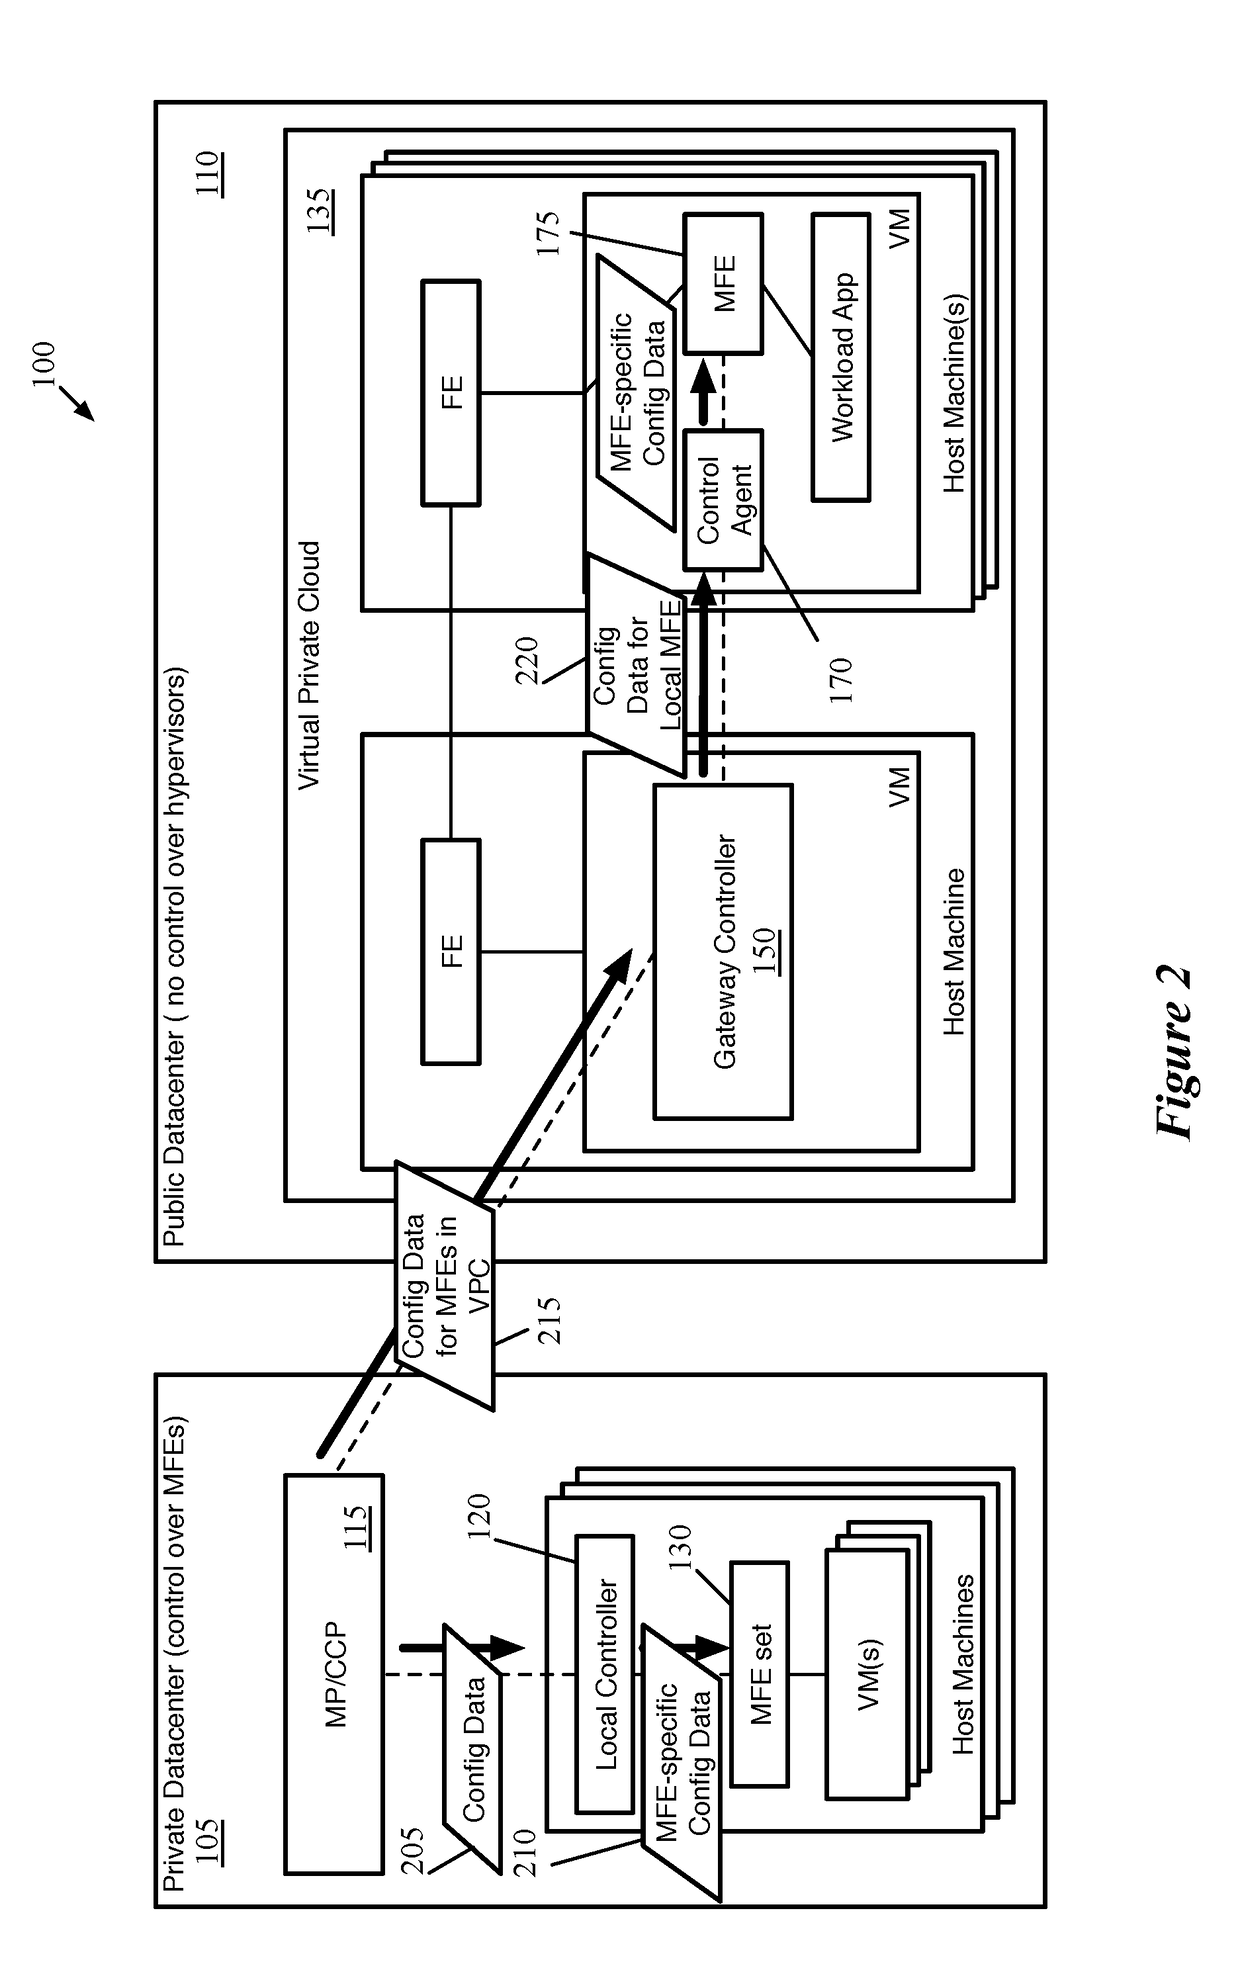 Distributed Network Encryption for Logical Network Implemented in Public Cloud